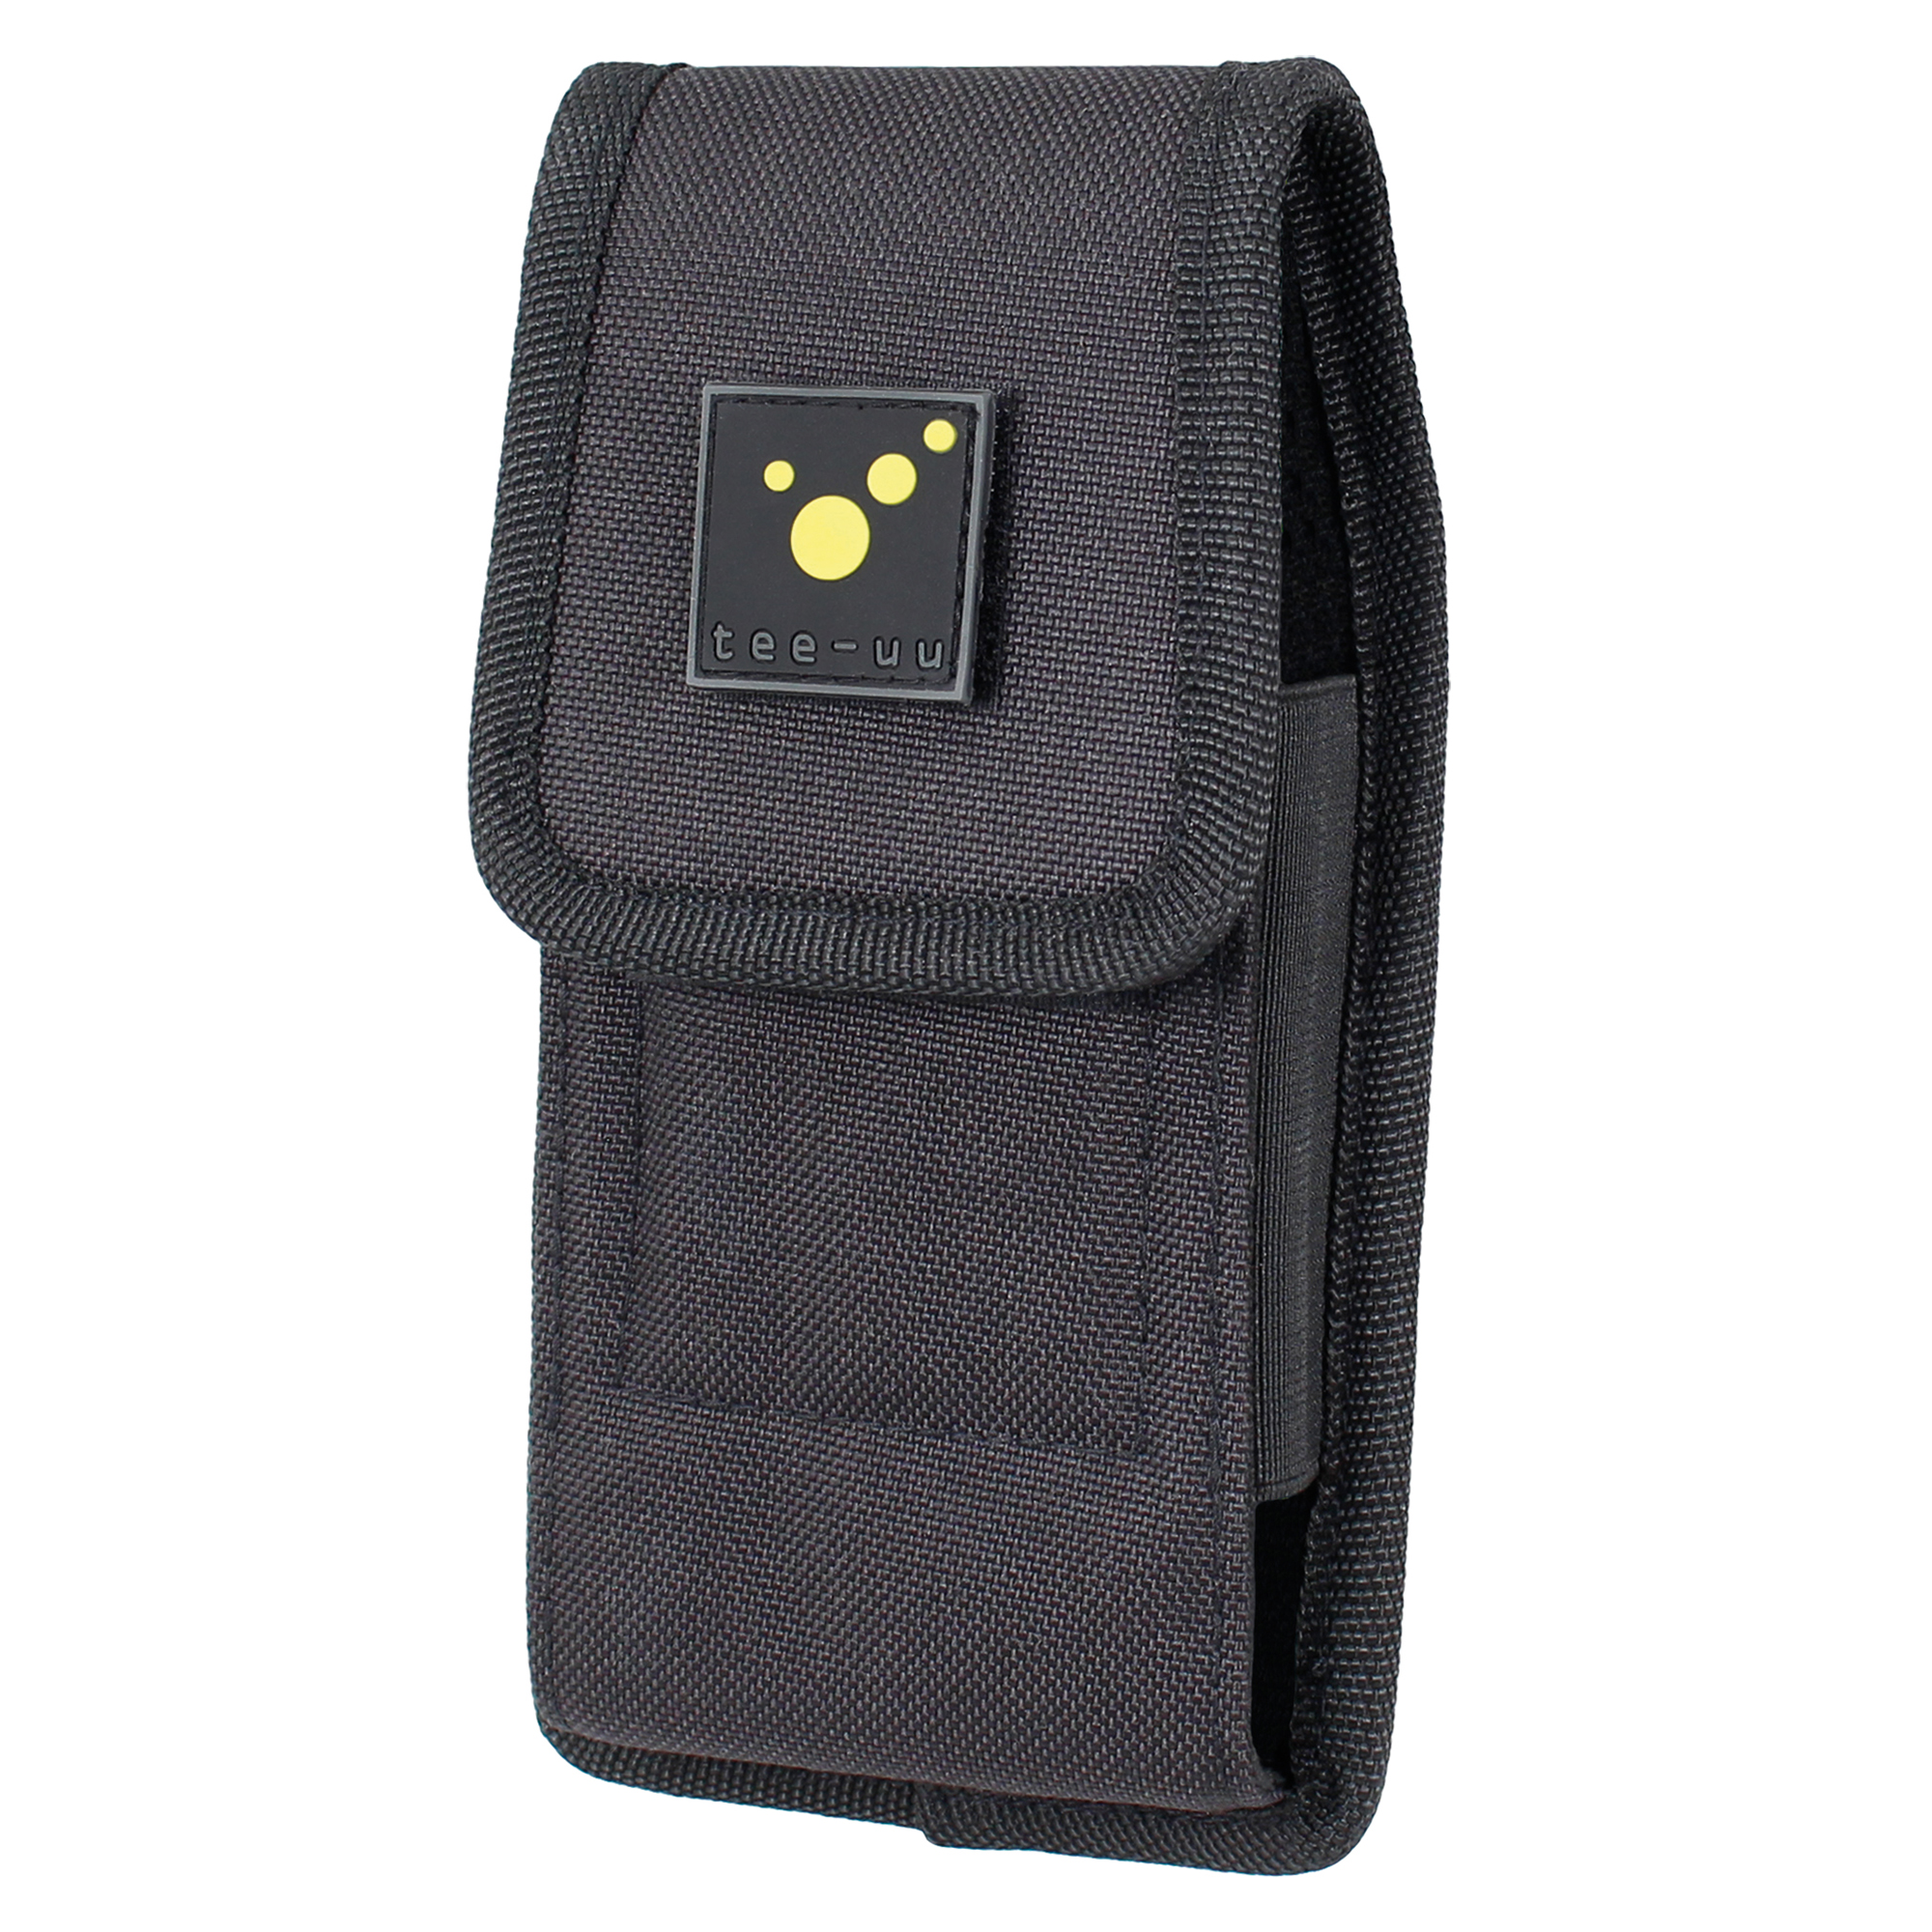 tee-uu MOBILE TAC Smartphone-Holster MOLLE 10 x 15,5 x 4 cm